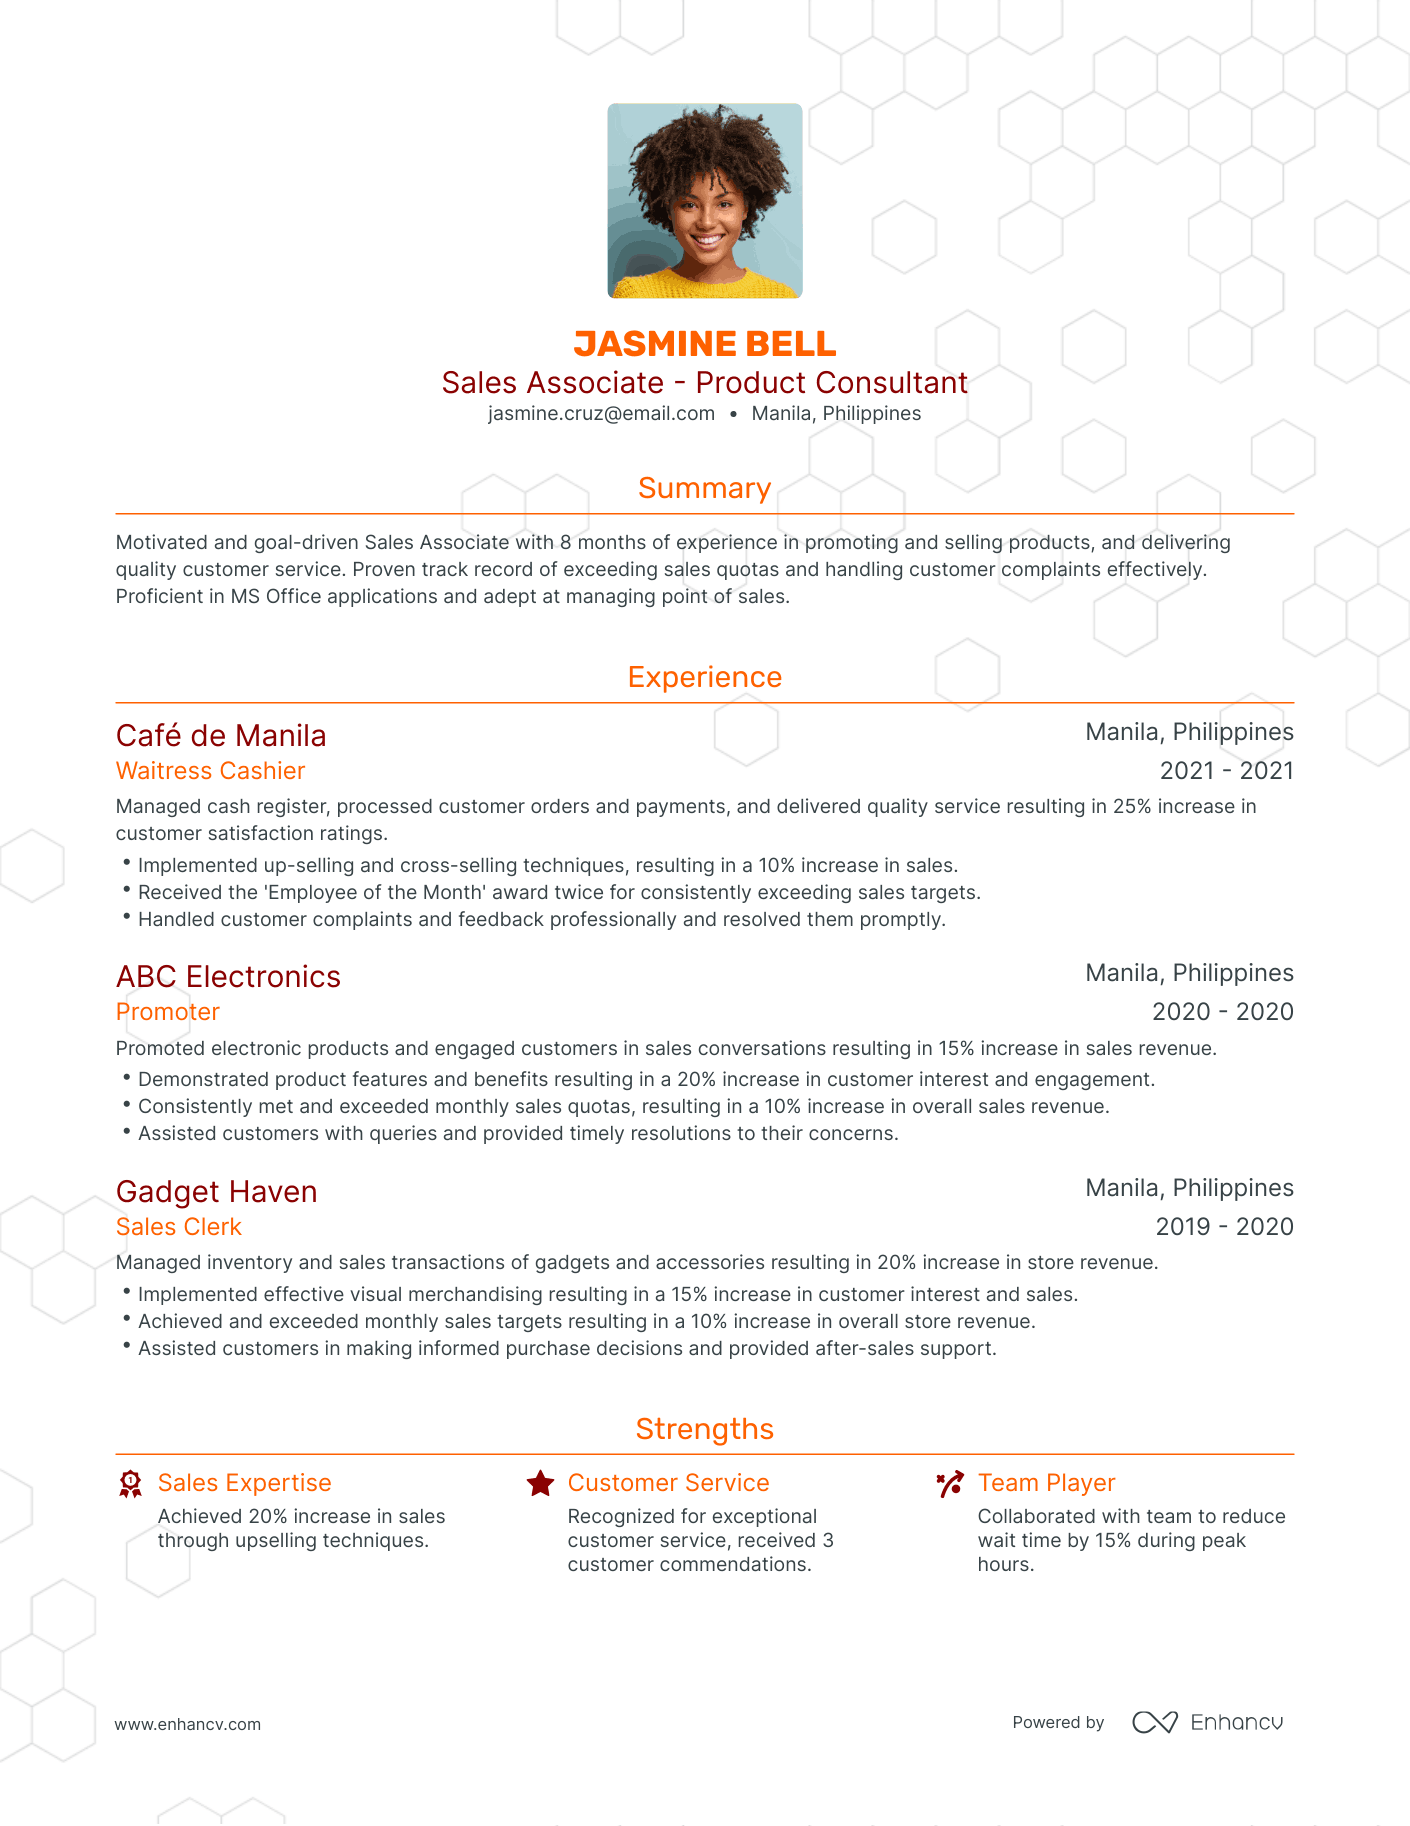 Traditional Waitress Cashier Resume Template